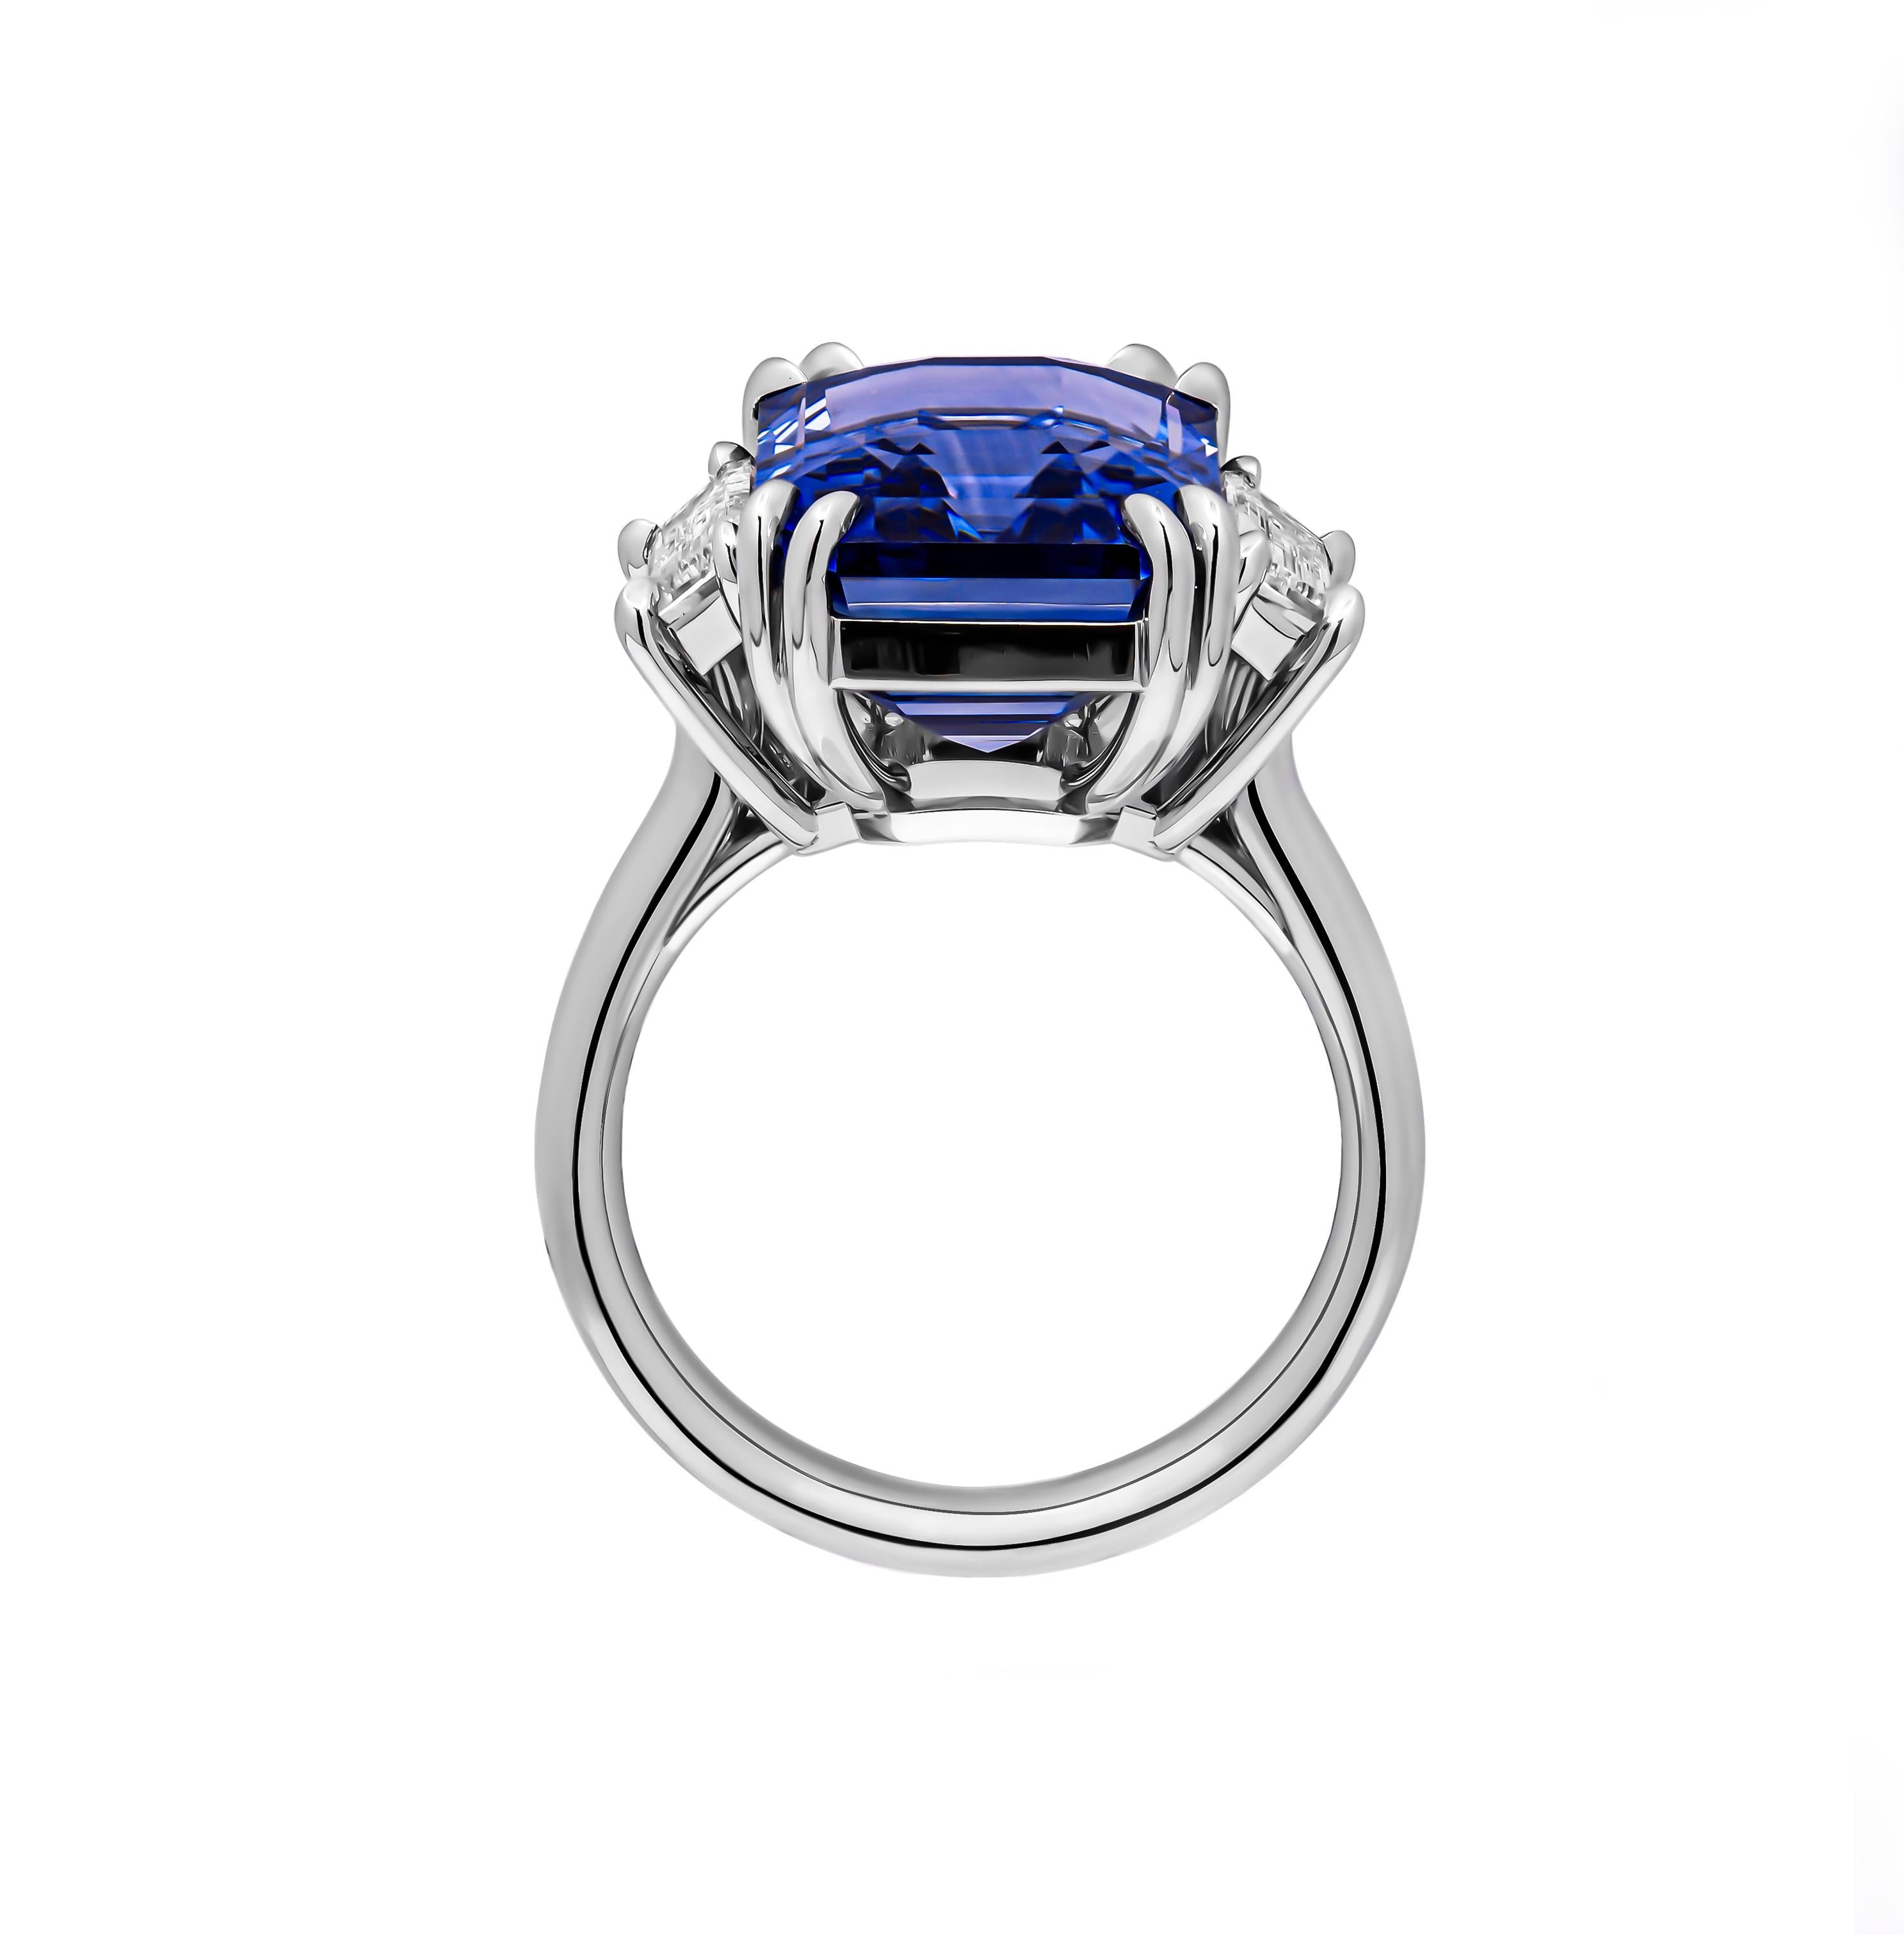 Behold a masterpiece of unparalleled beauty and sophistication: a magnificent three-stone ring, exquisitely crafted in lustrous 950 platinum. At its heart lies a captivating 12.02 carat emerald-cut blue sapphire, reminiscent of the deep azure hues